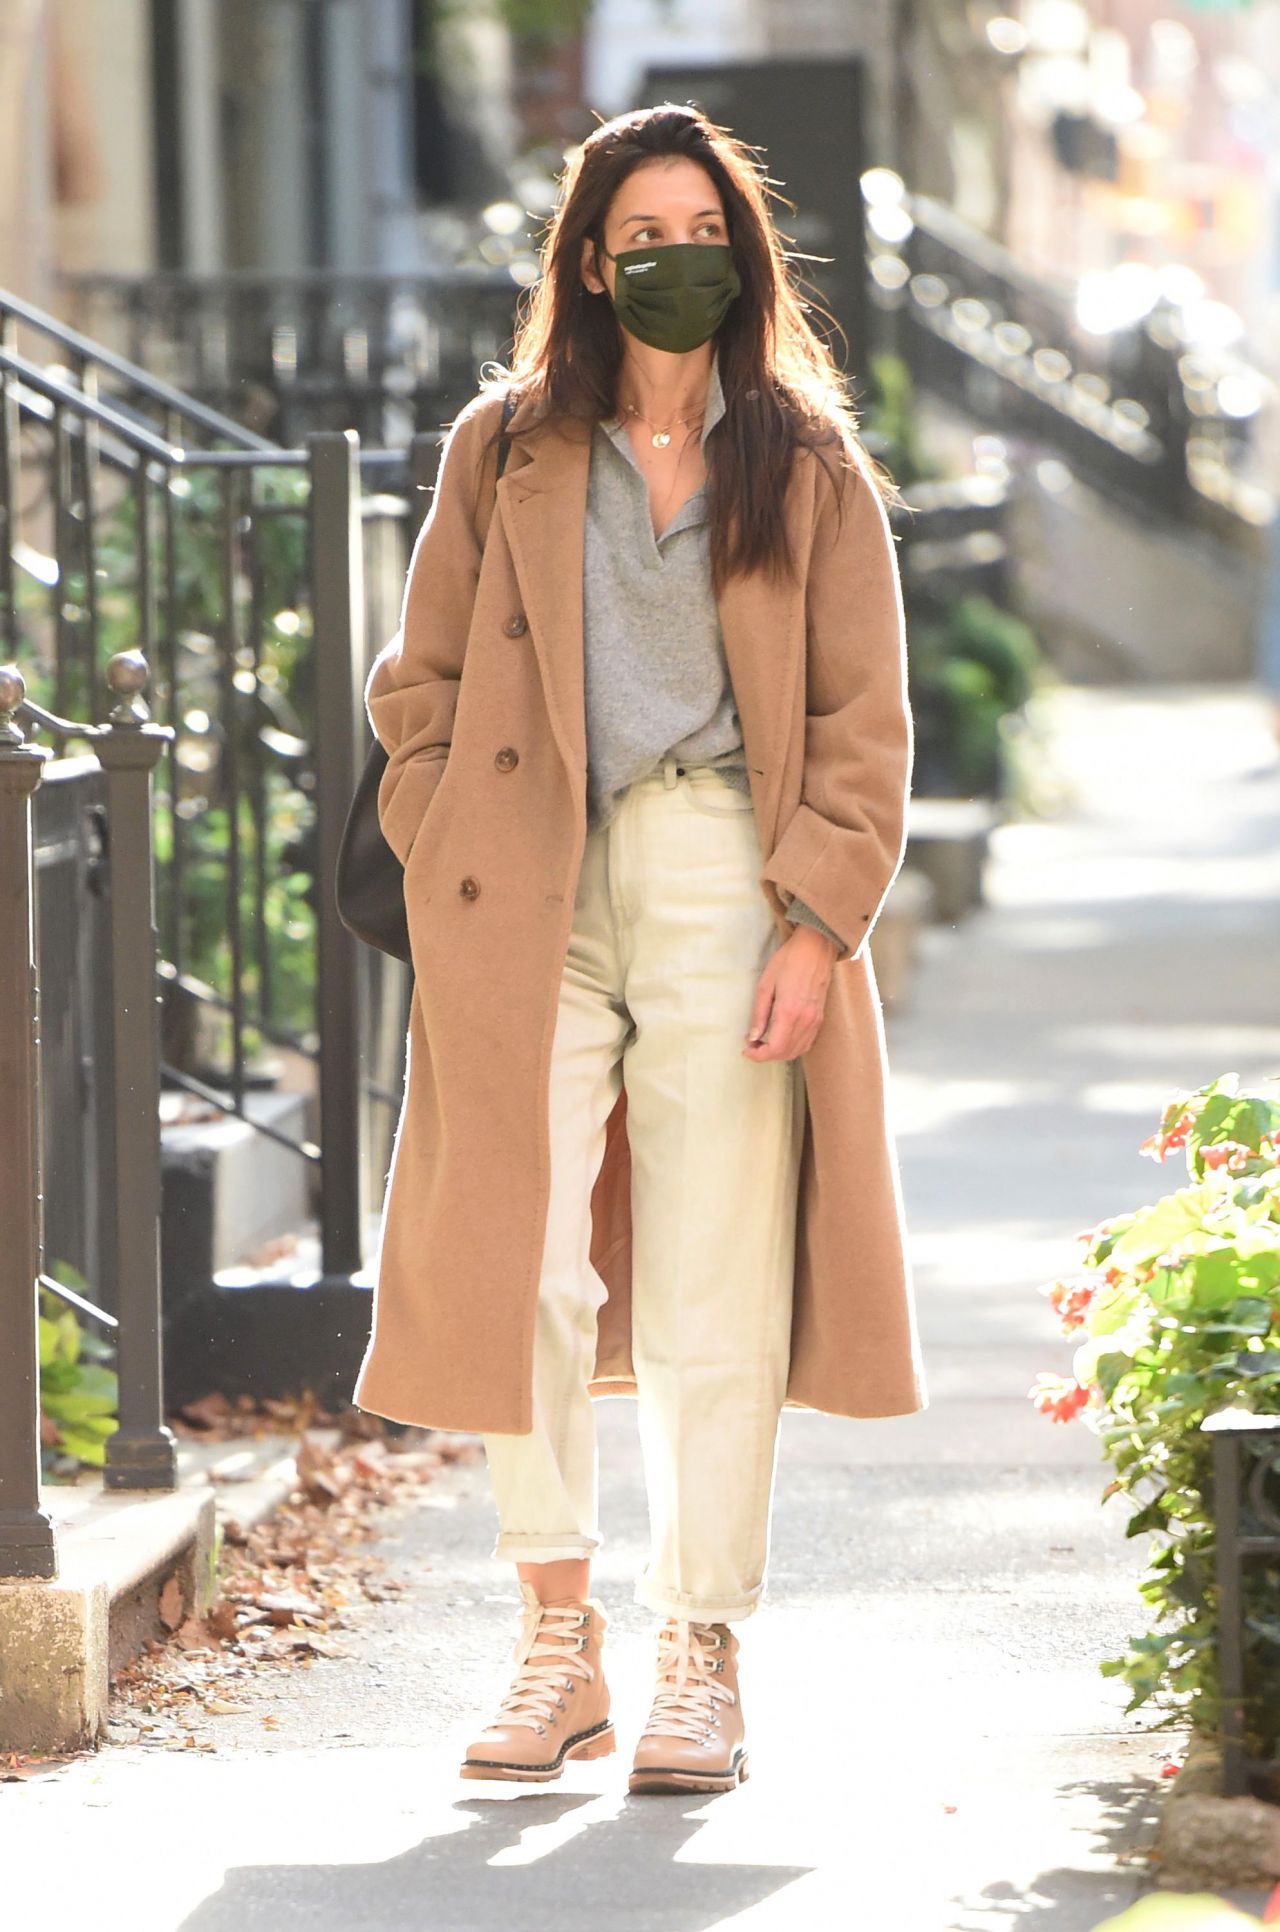 katie-holmes-out-in-nyc-10-15-2020-2.jpg